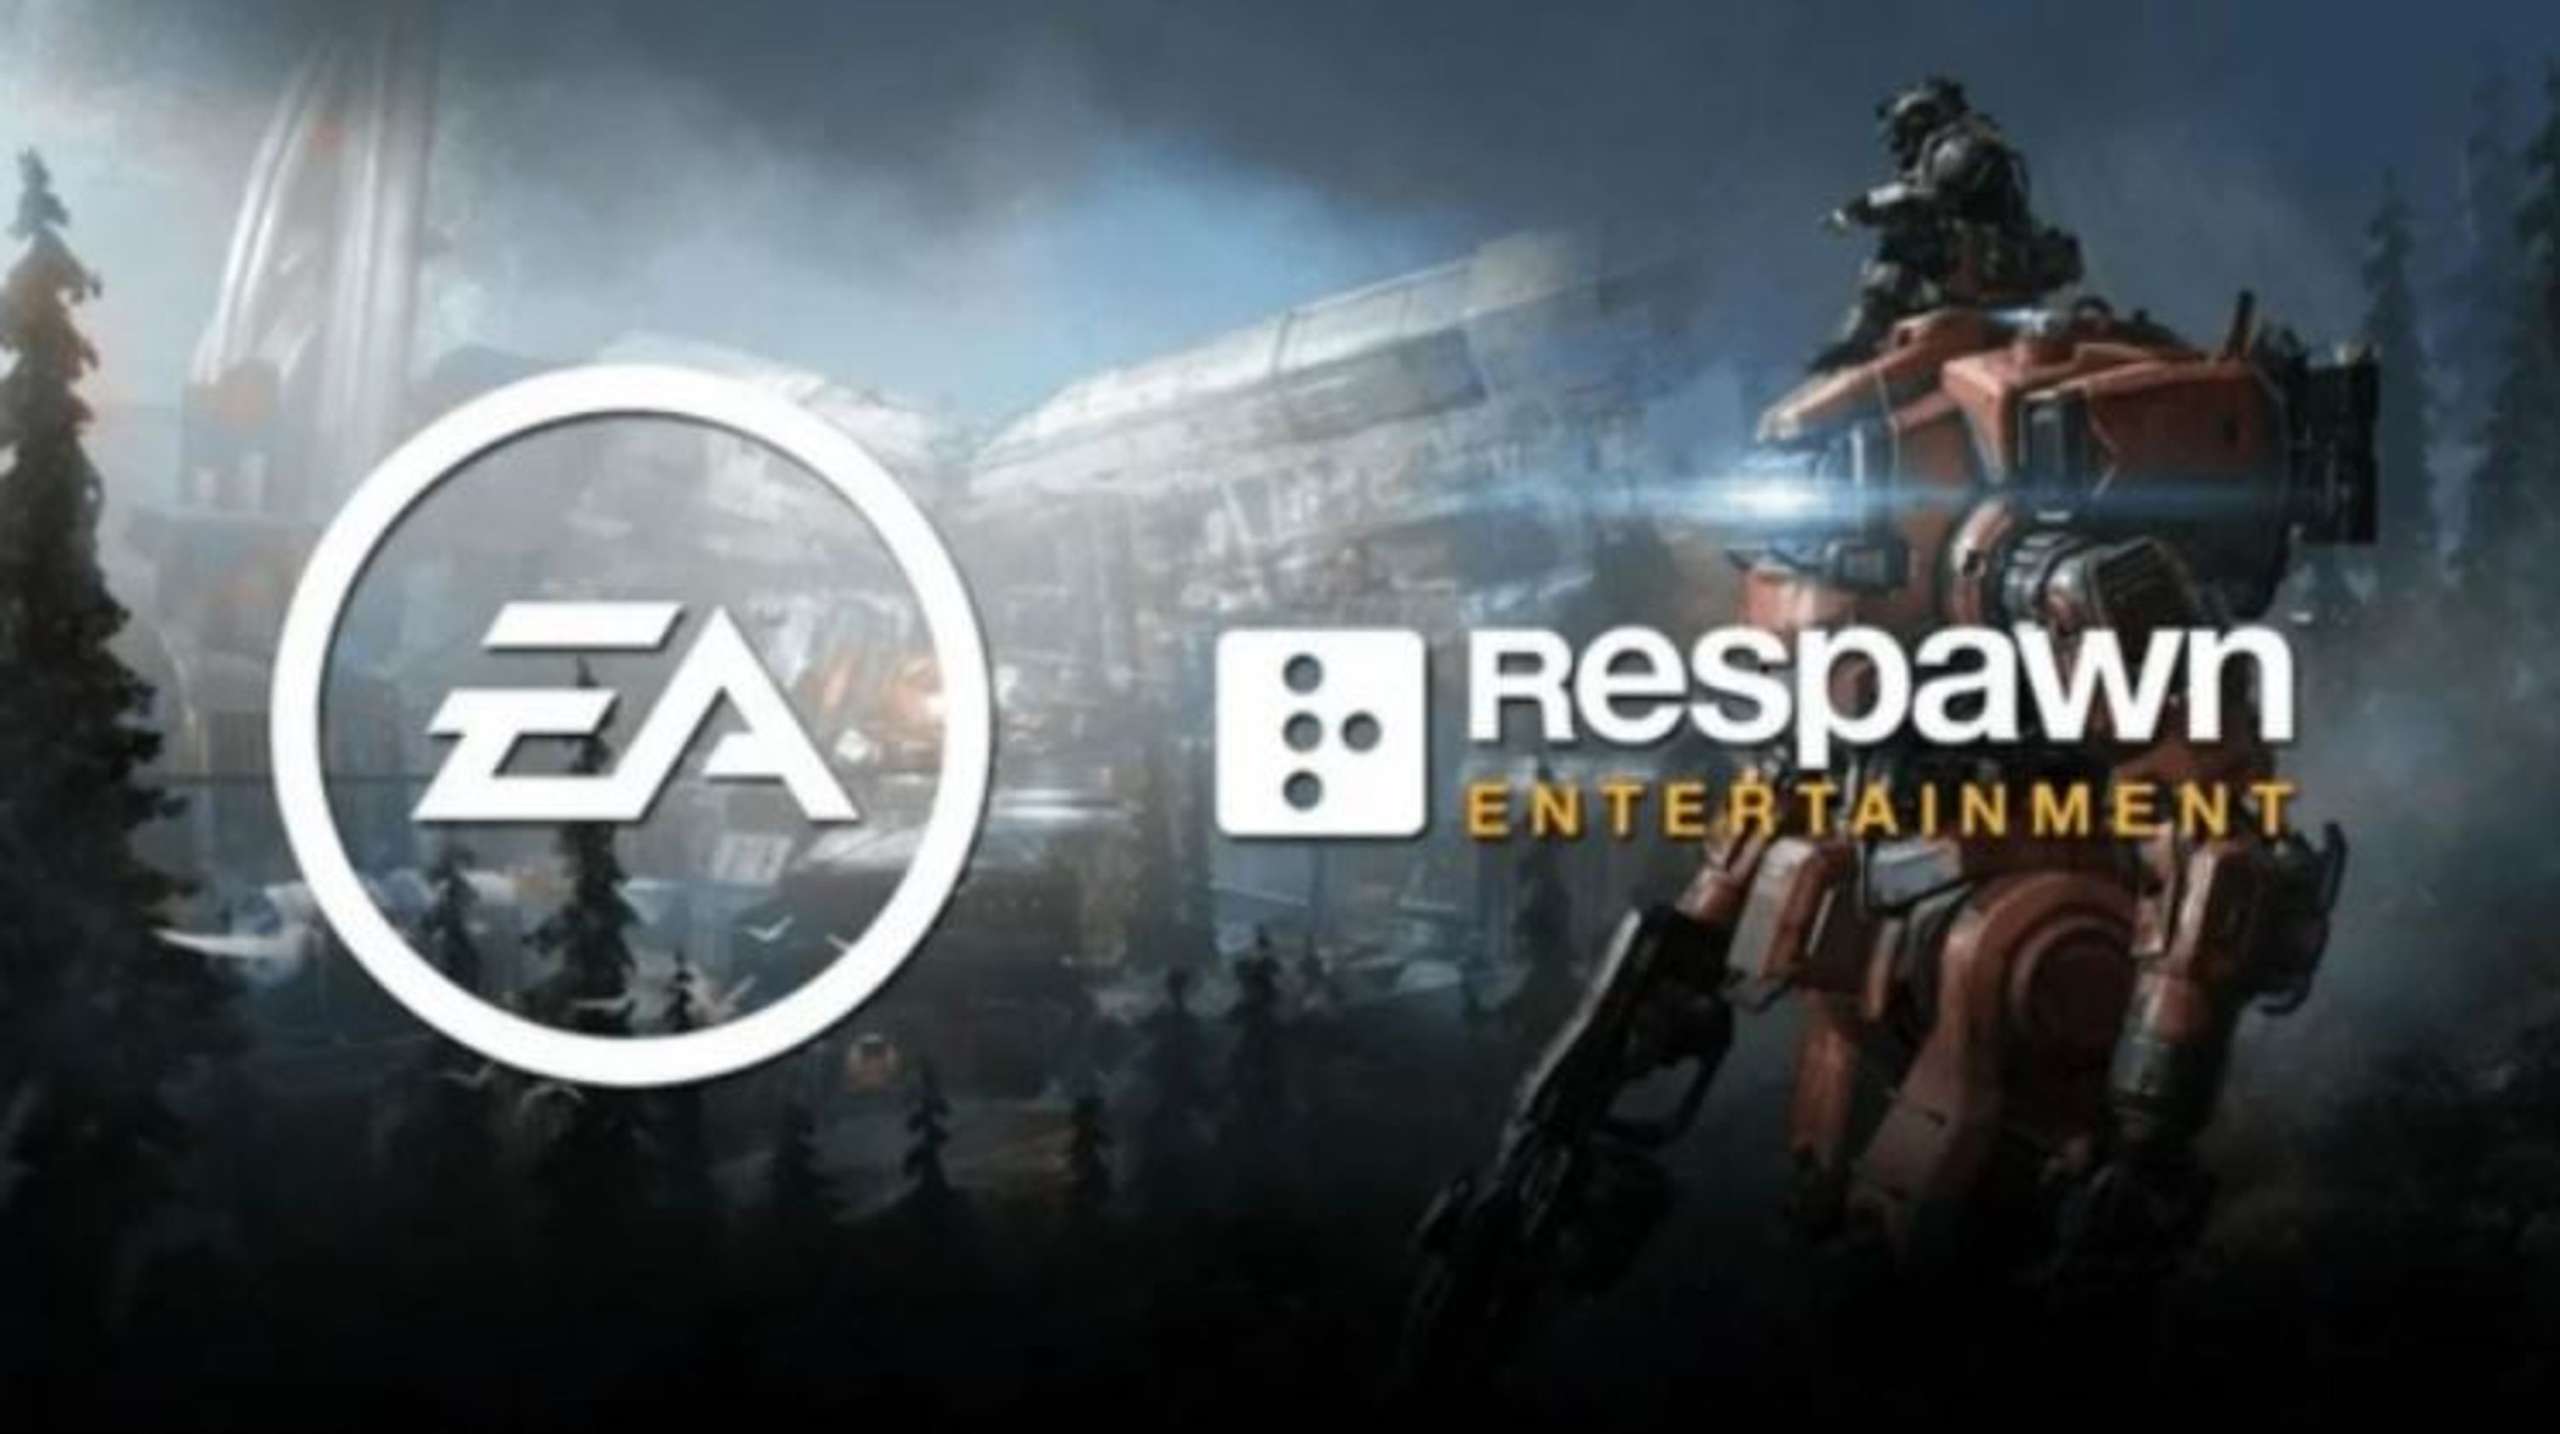 Sources Told GamesBeat That Respawn Was Working On A Single-Player First-Person Shooter